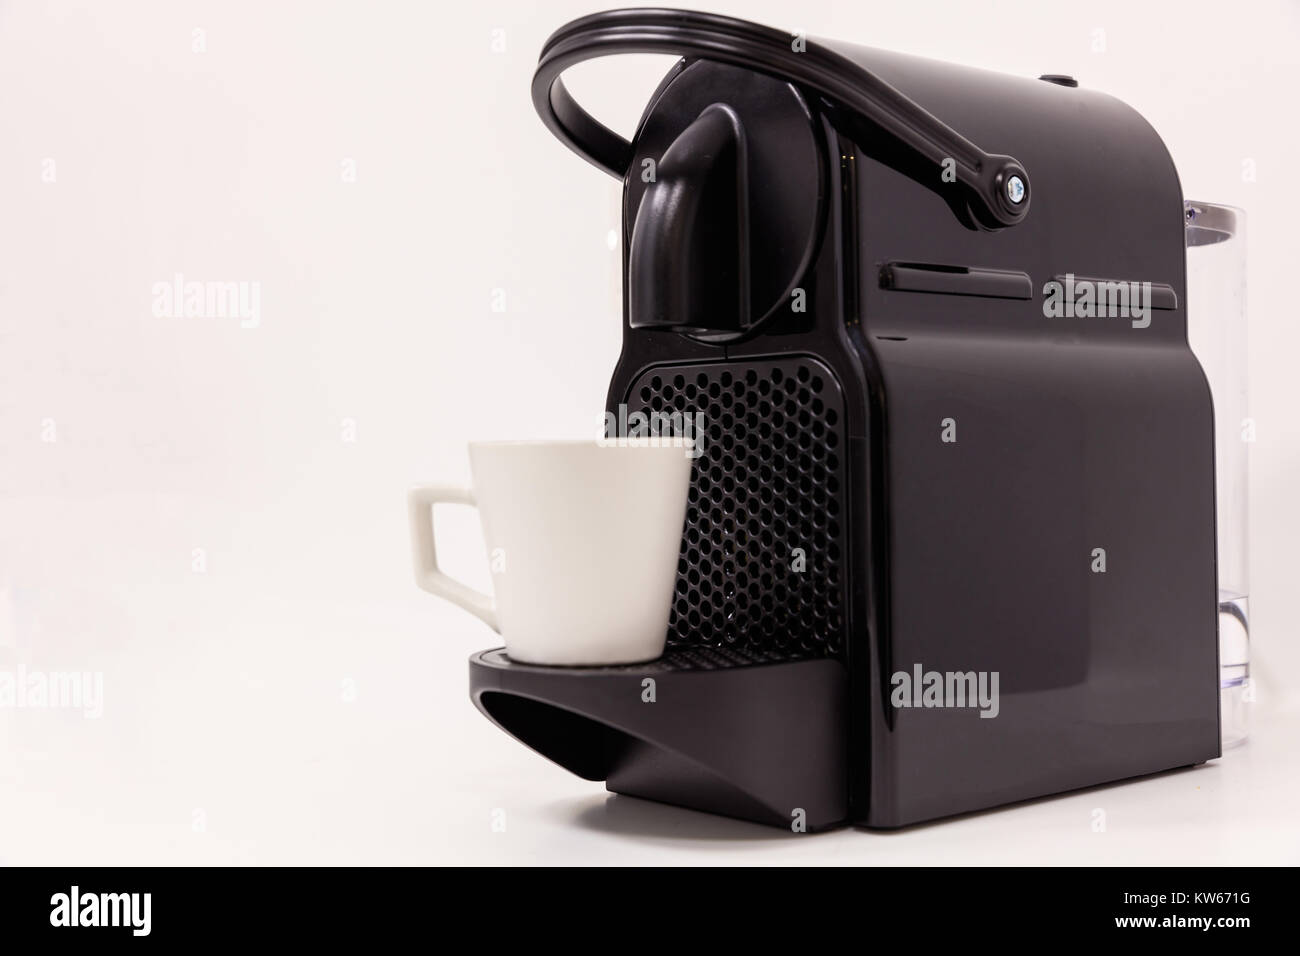 Espresso coffee maker machine with modern design. White background, close up view with details. Stock Photo